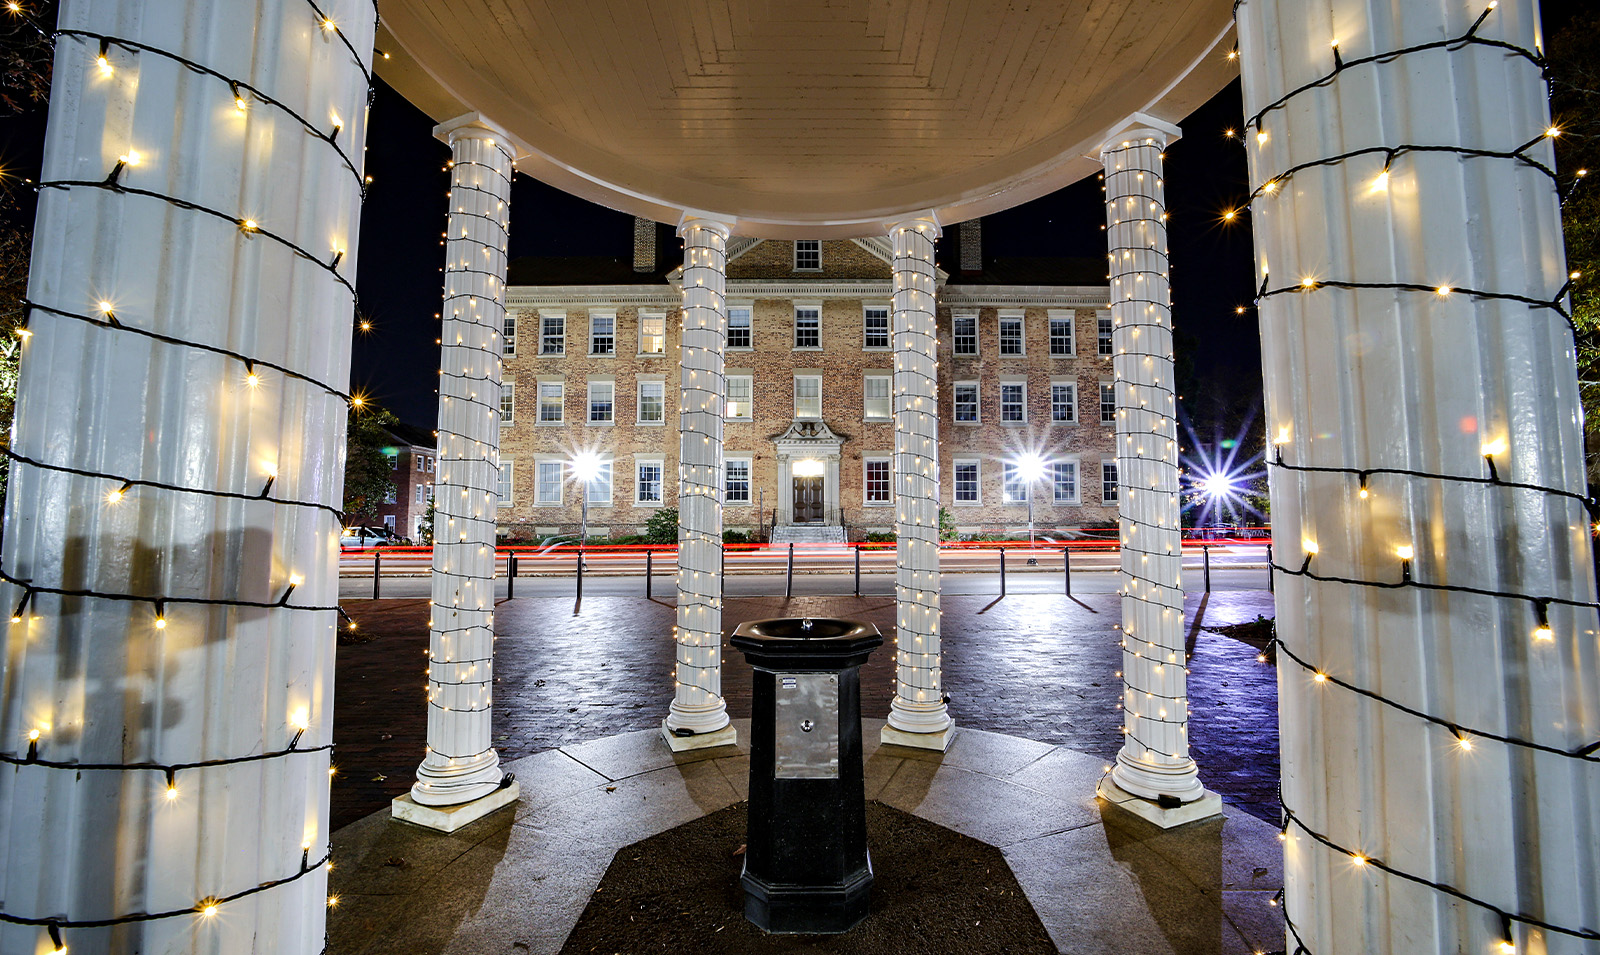 Nightime view from inside the Old Well on the campus of UNC-Chapel Hill. Pictured is the well's black fountain. Holiday lights are seen on the structure's white beams, and in the background are passing cars on Cameron Avenue and South Building.